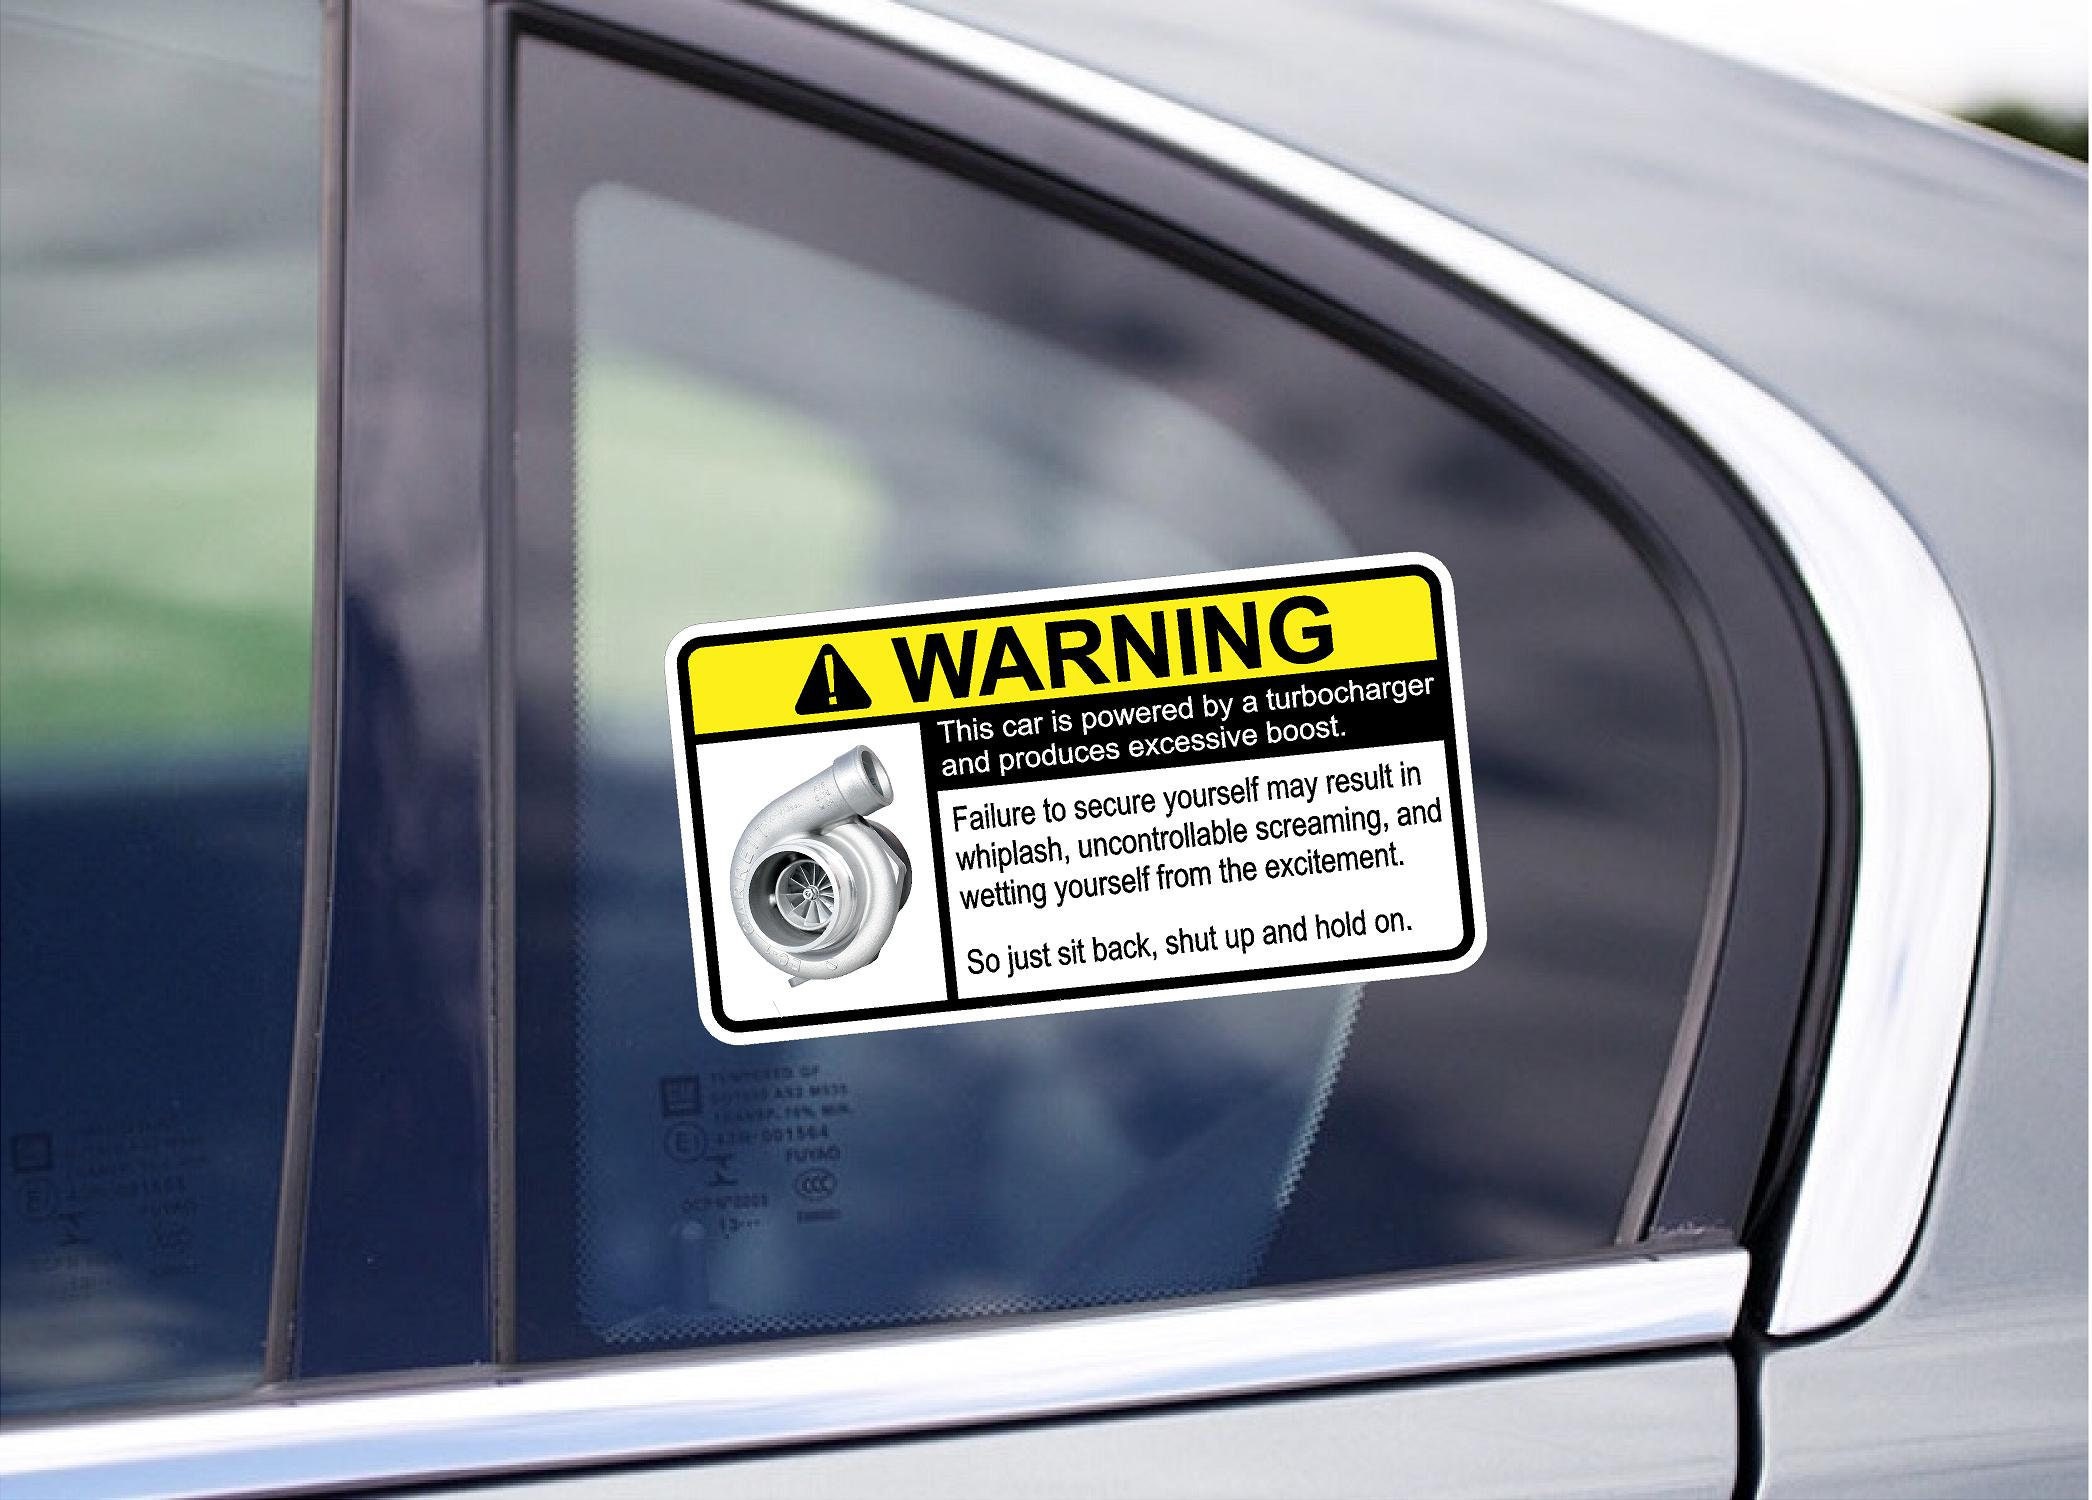 Turbo Warning Sign - C&A Cars Sticker for Sale by Color&Art Lab